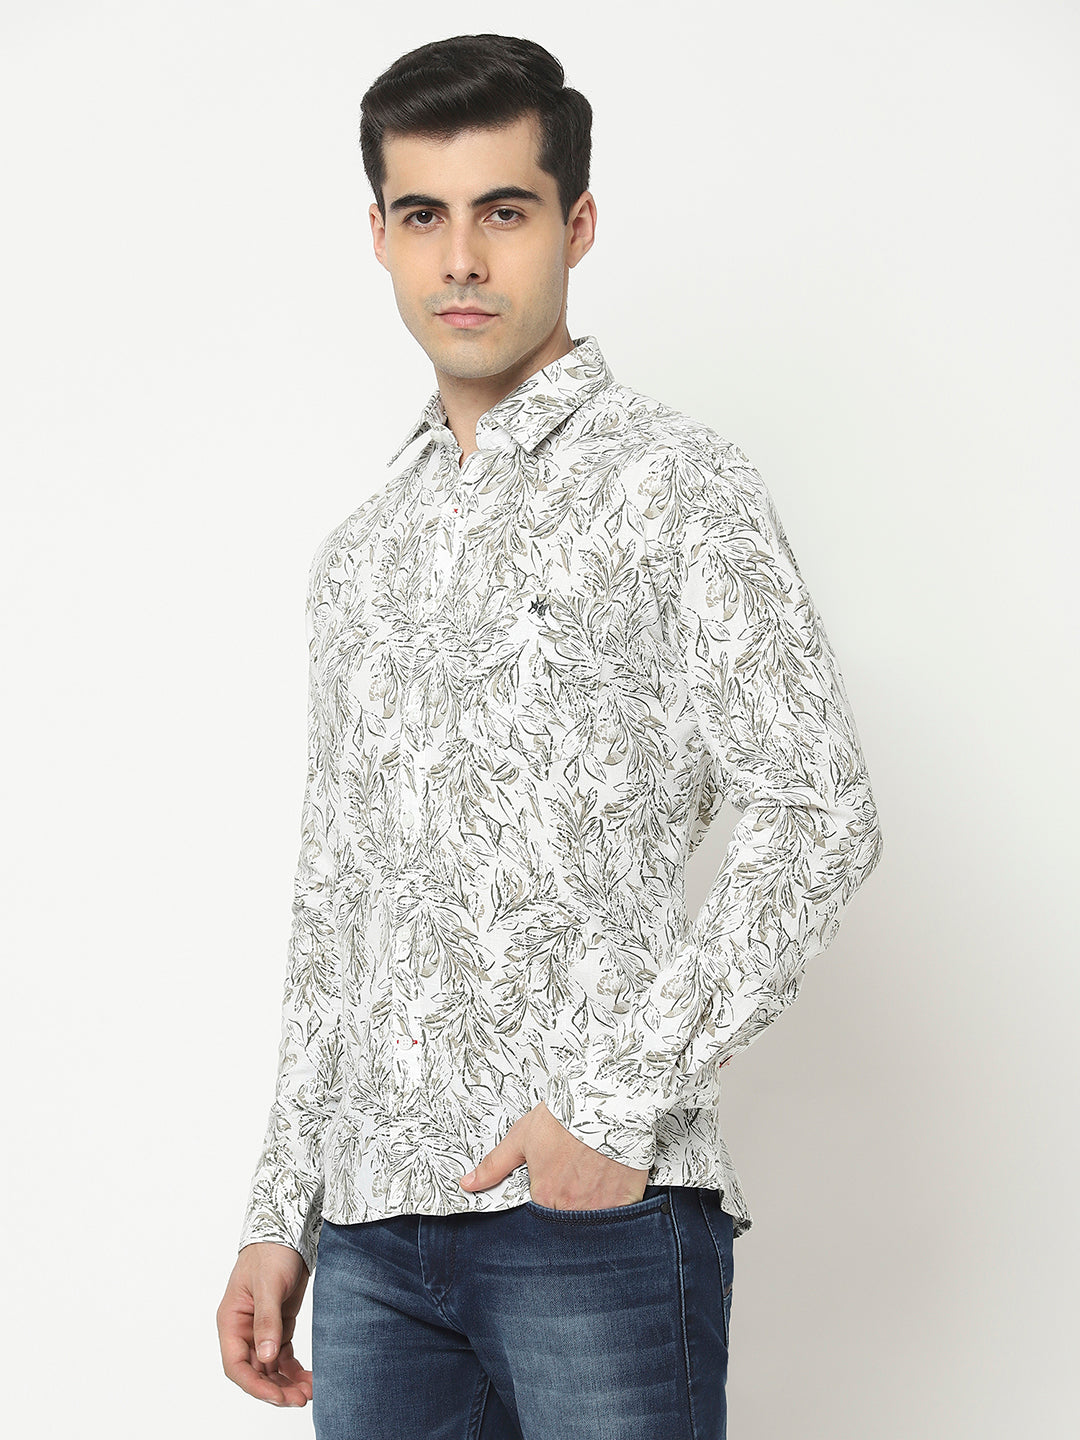  White Shirt in Floral Print